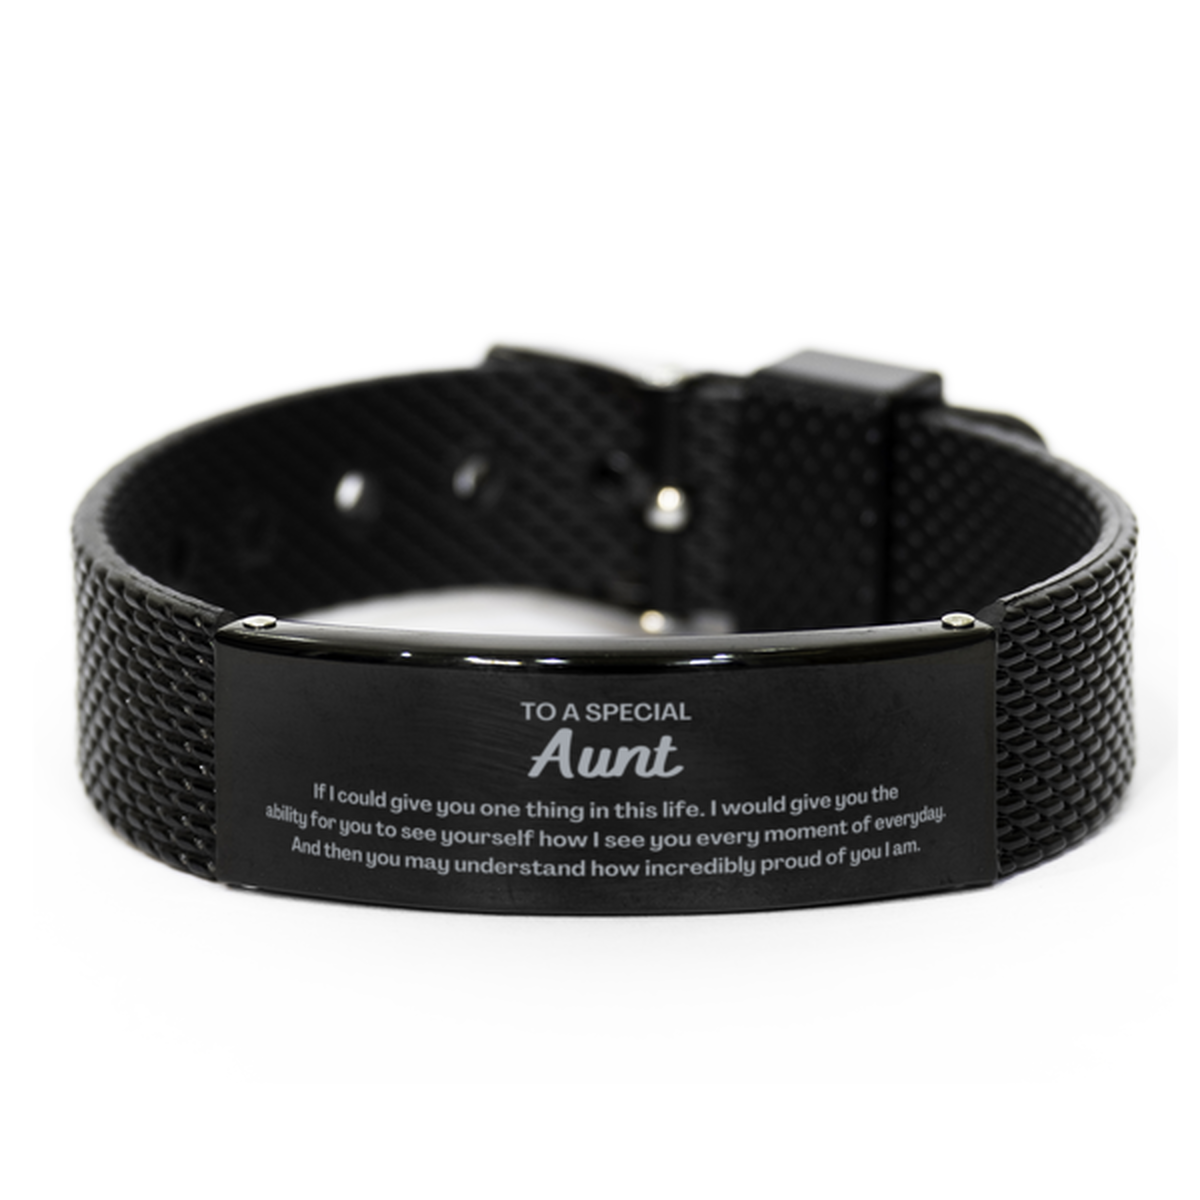 To My Aunt Black Shark Mesh Bracelet, Gifts For Aunt Engraved, Inspirational Gifts for Christmas Birthday, Epic Gifts for Aunt To A Special Aunt how incredibly proud of you I am